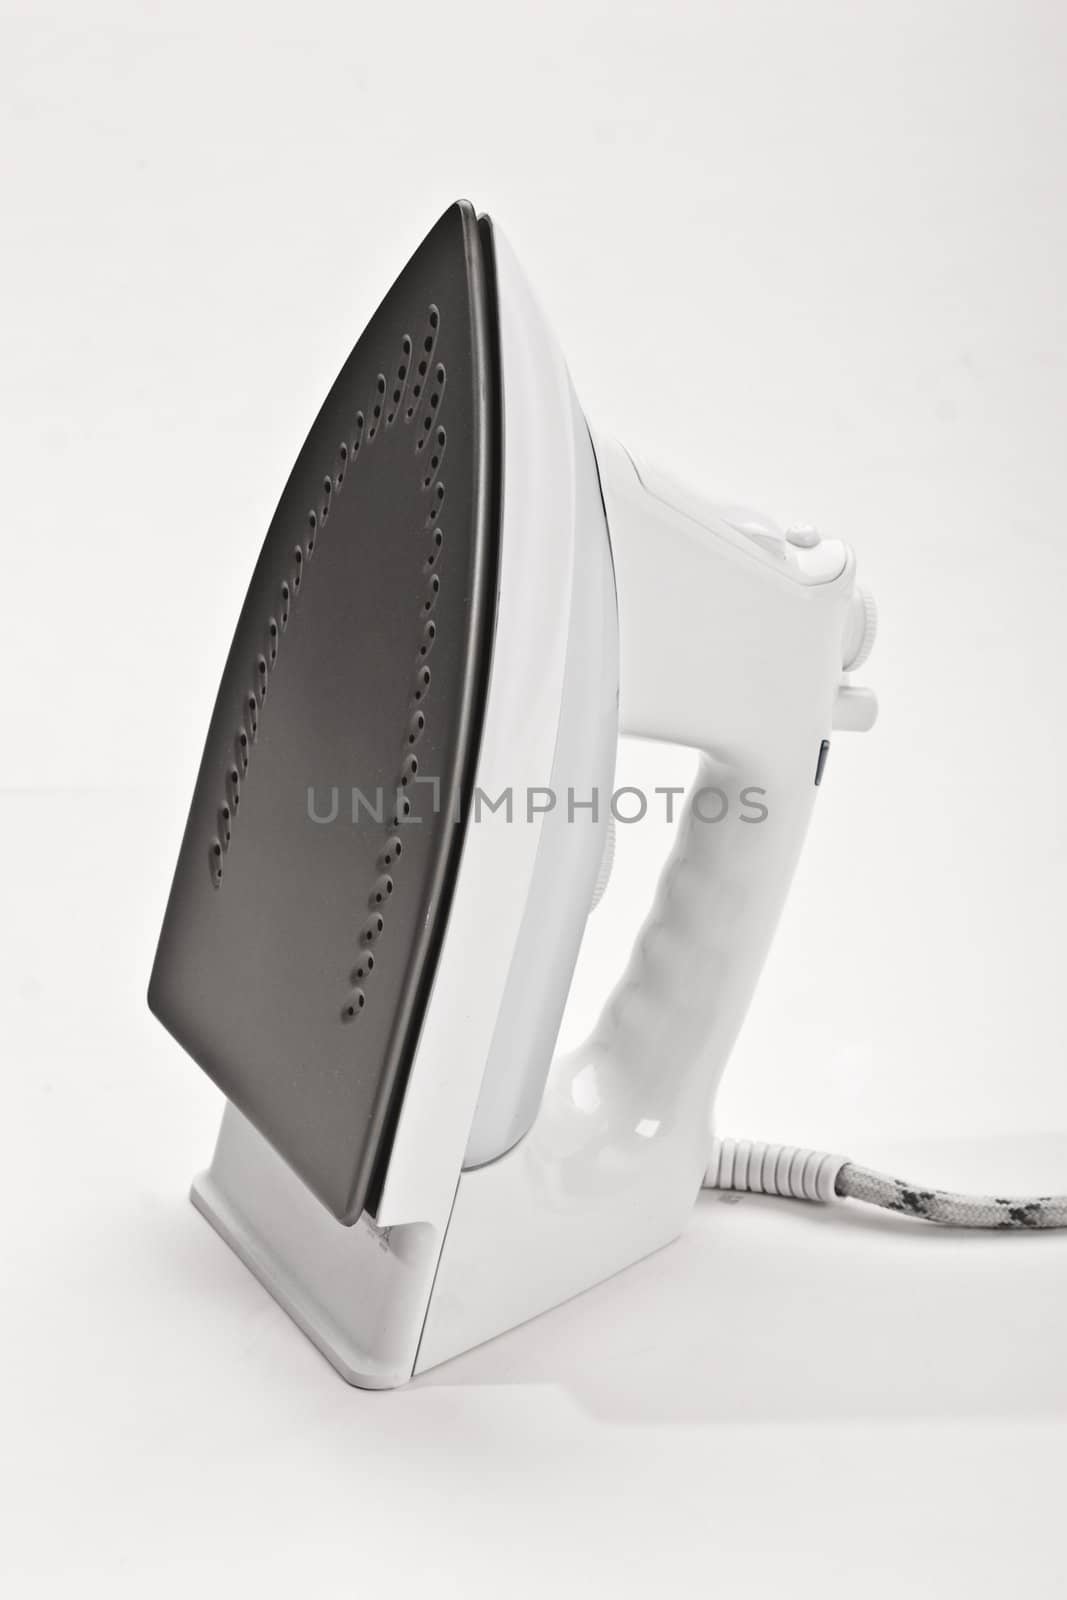 home object: electric iron over white background